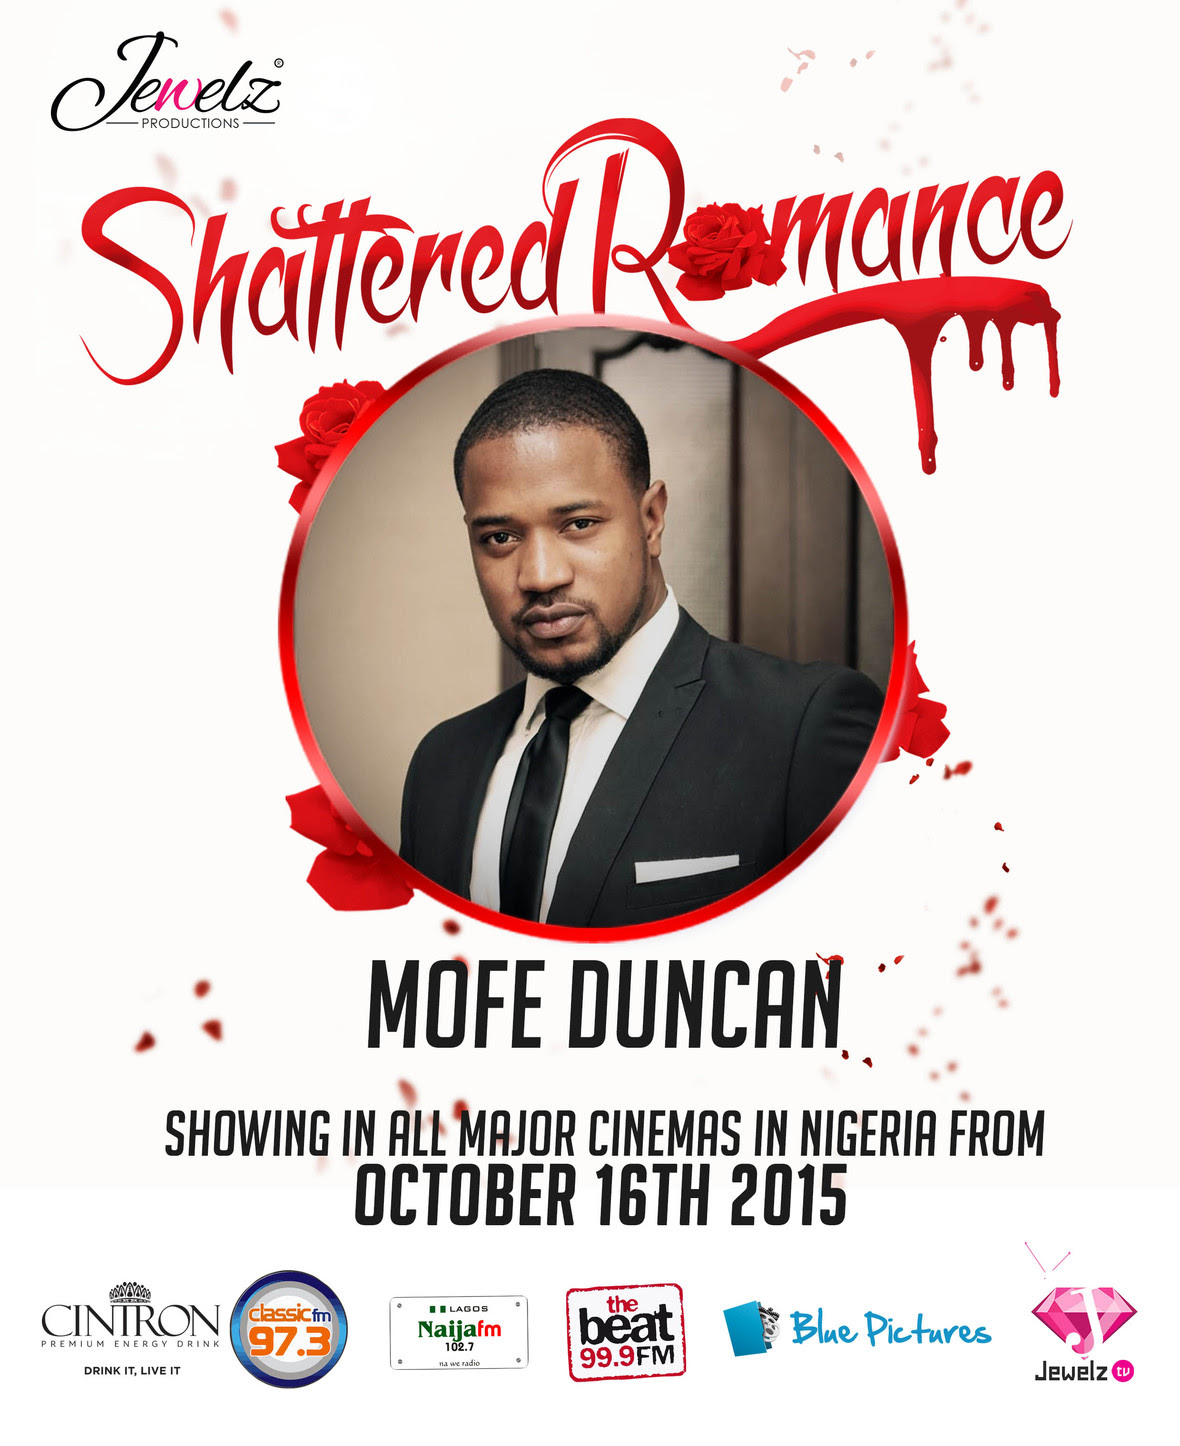 shattered Romance  NOMINEES  MOFE